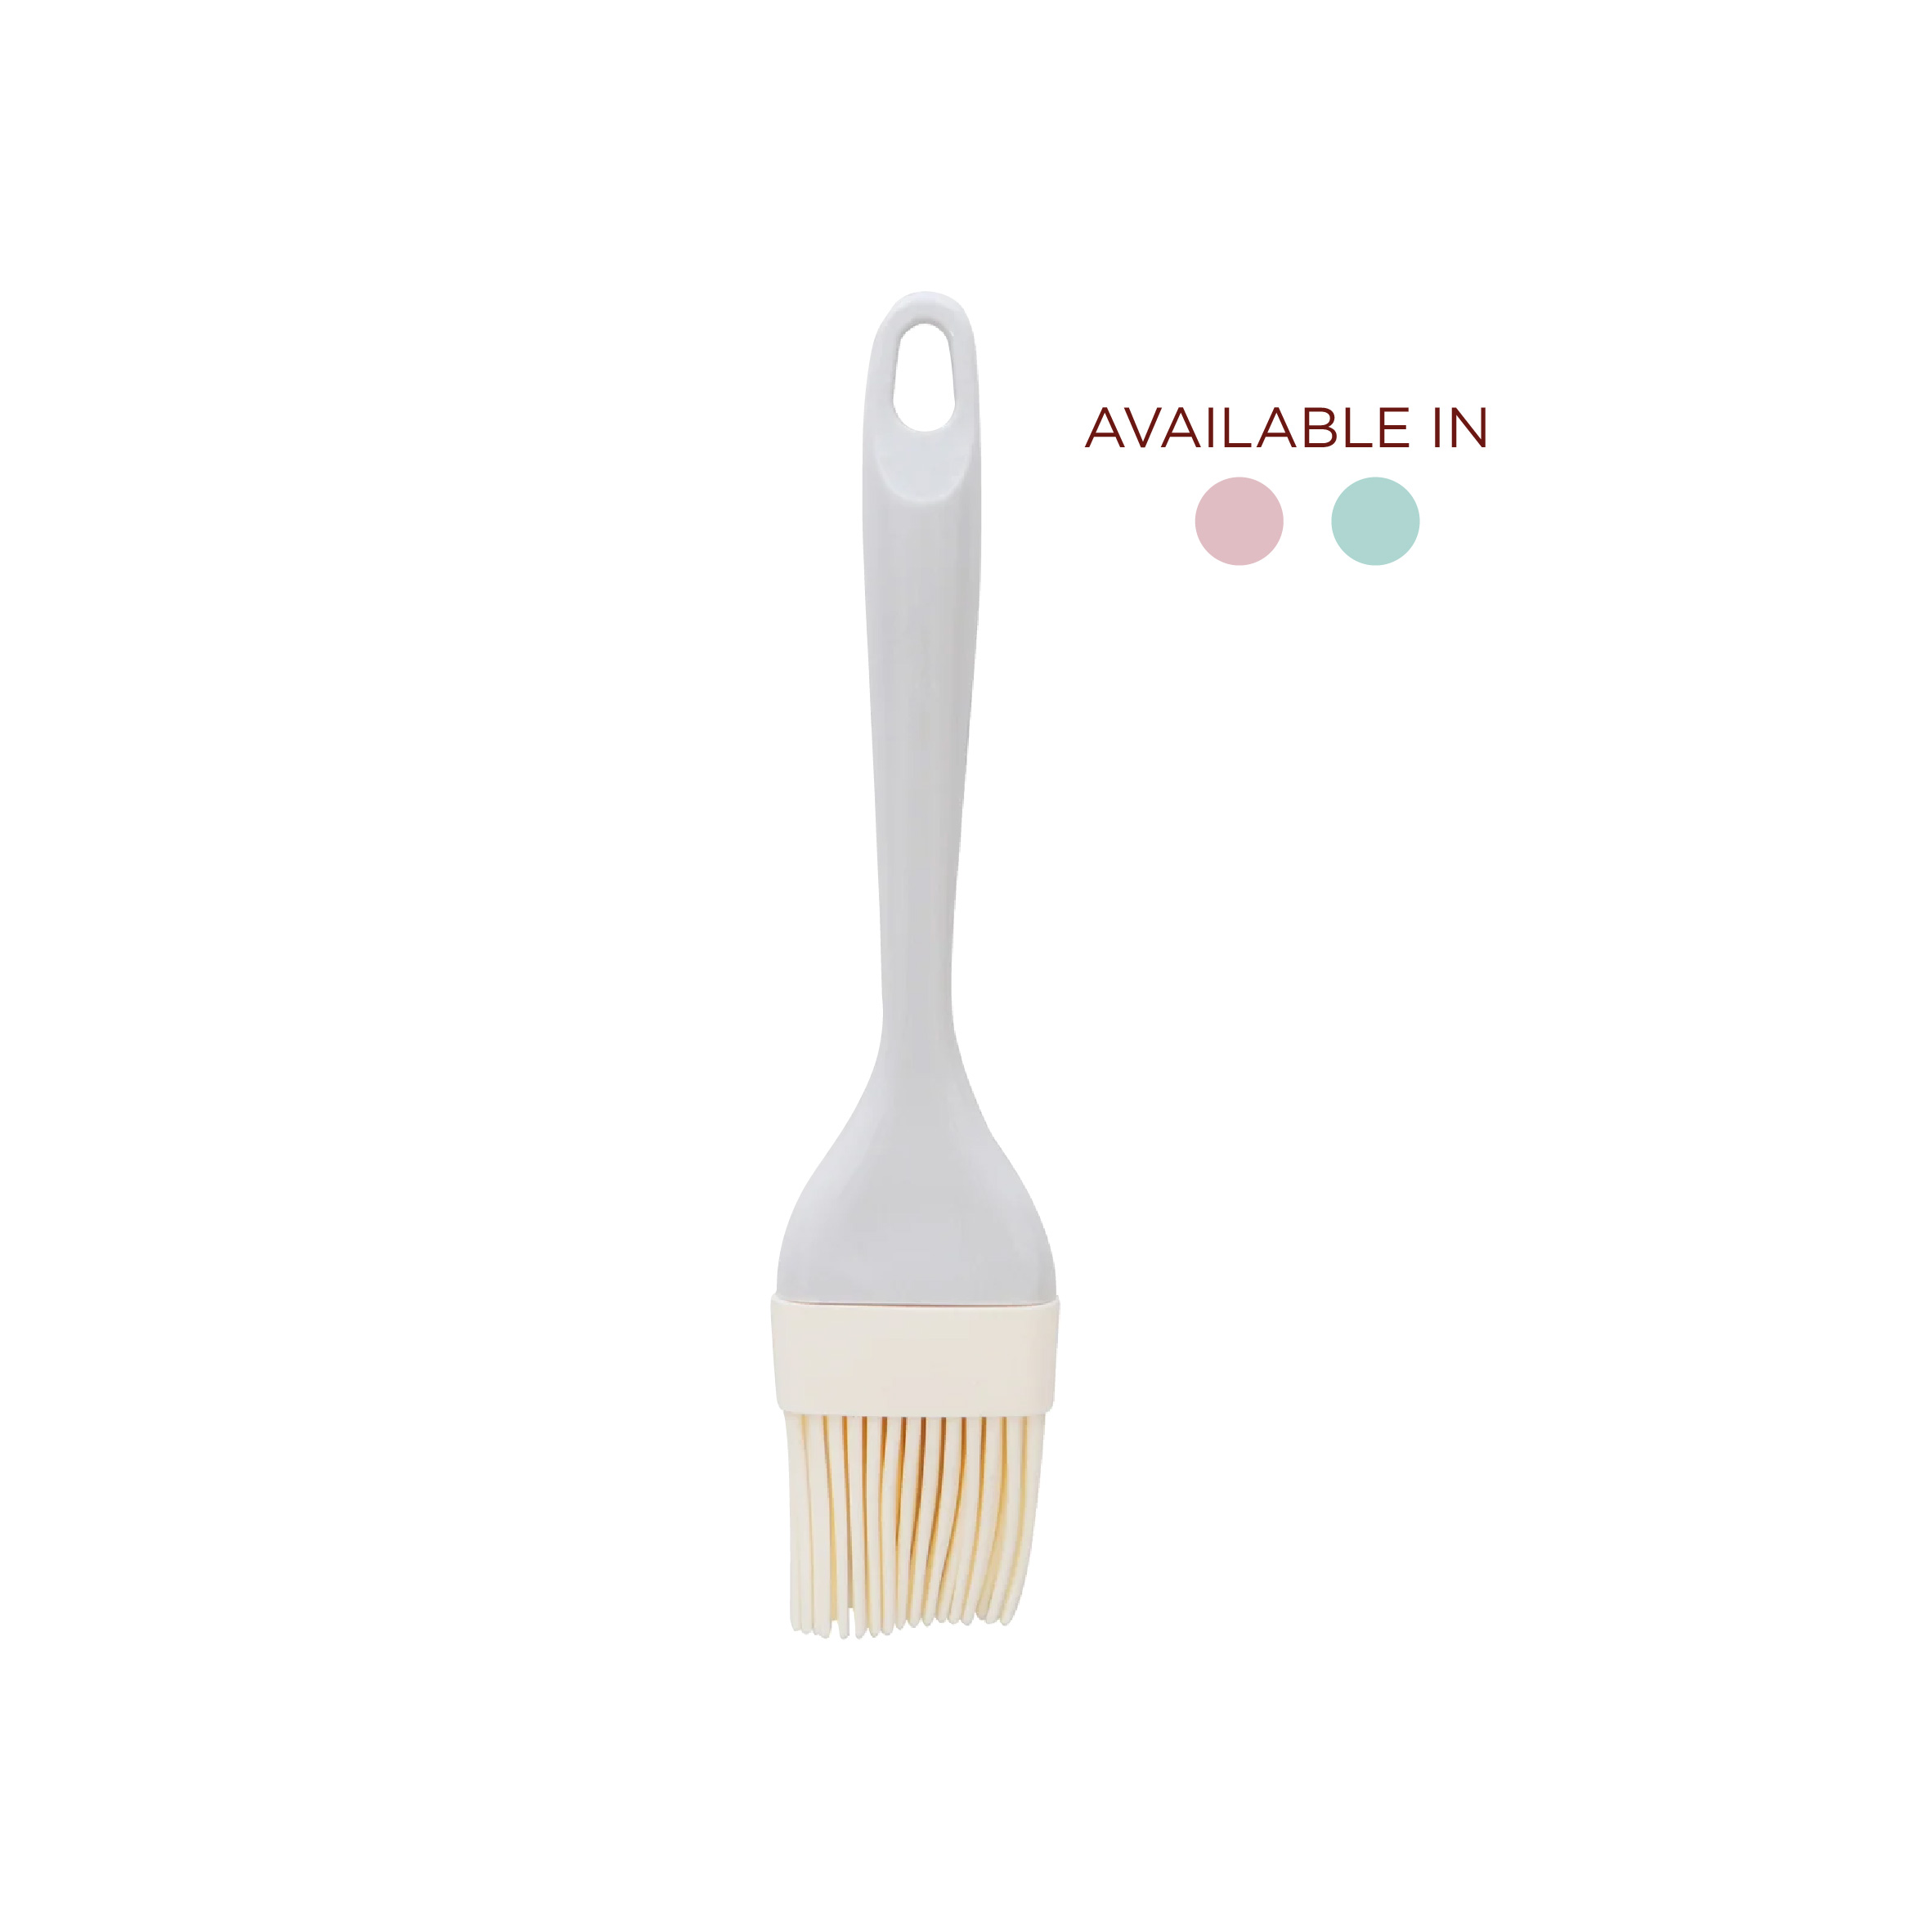 Sunplast Silicone Egg Brush (Available in Pink / Blue), SC-294